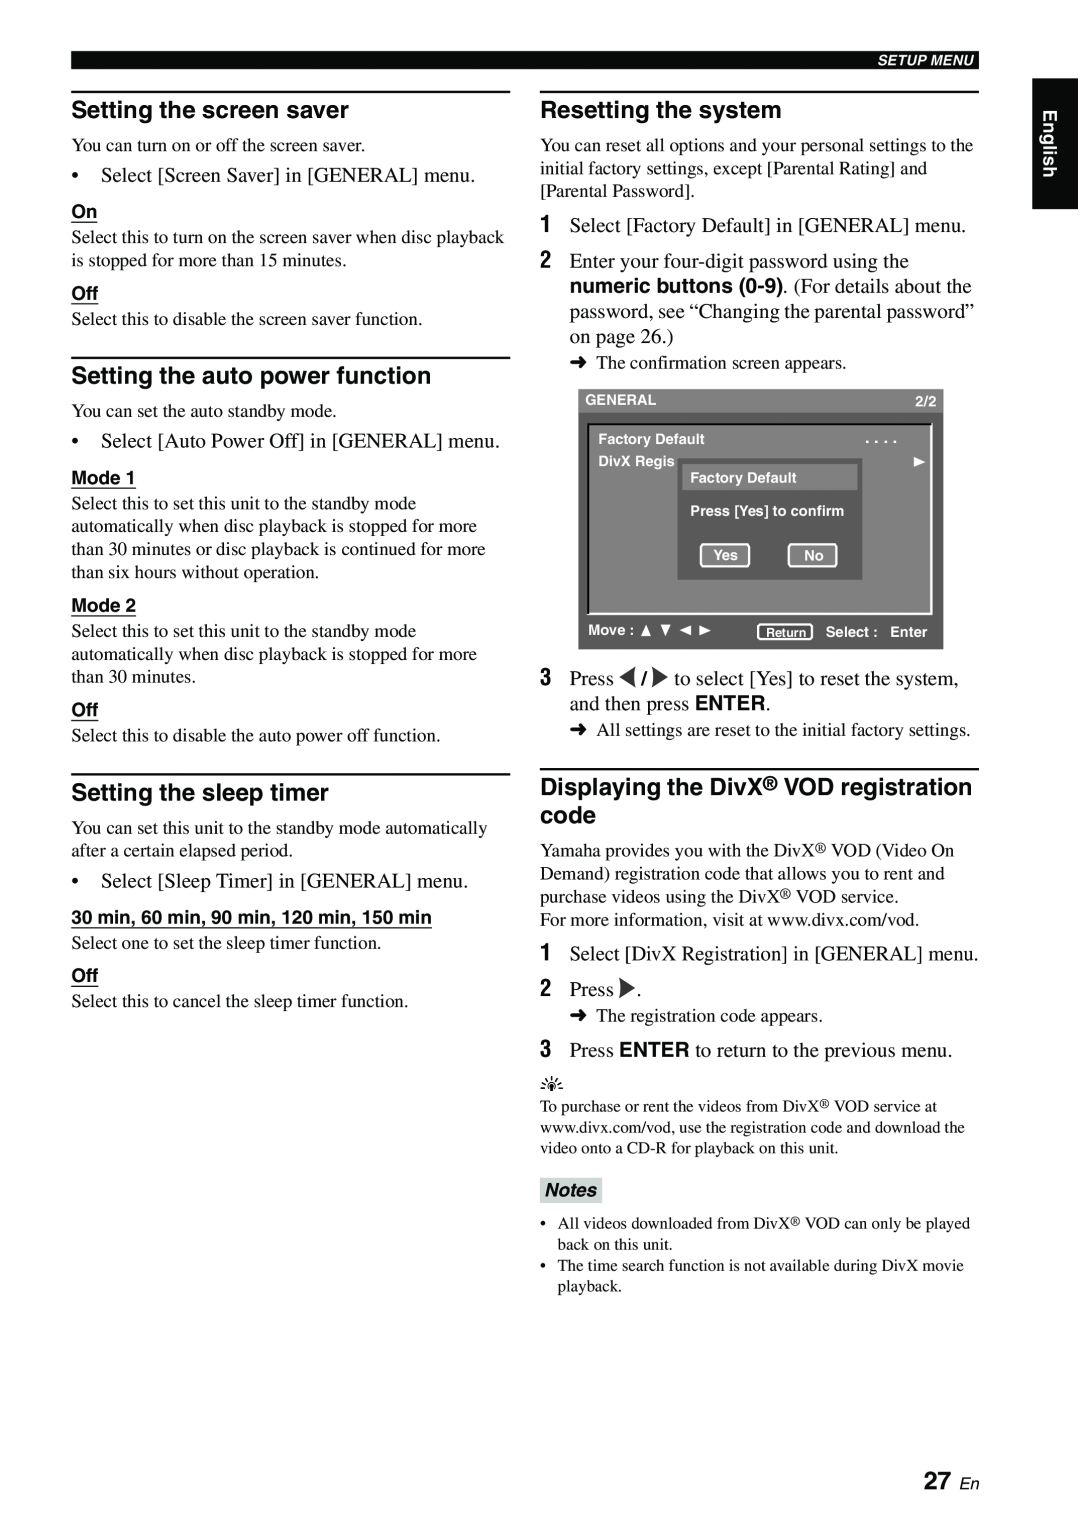 Yamaha DVD-S1700B manual 27 En, Setting the screen saver, Setting the auto power function, Resetting the system, English 